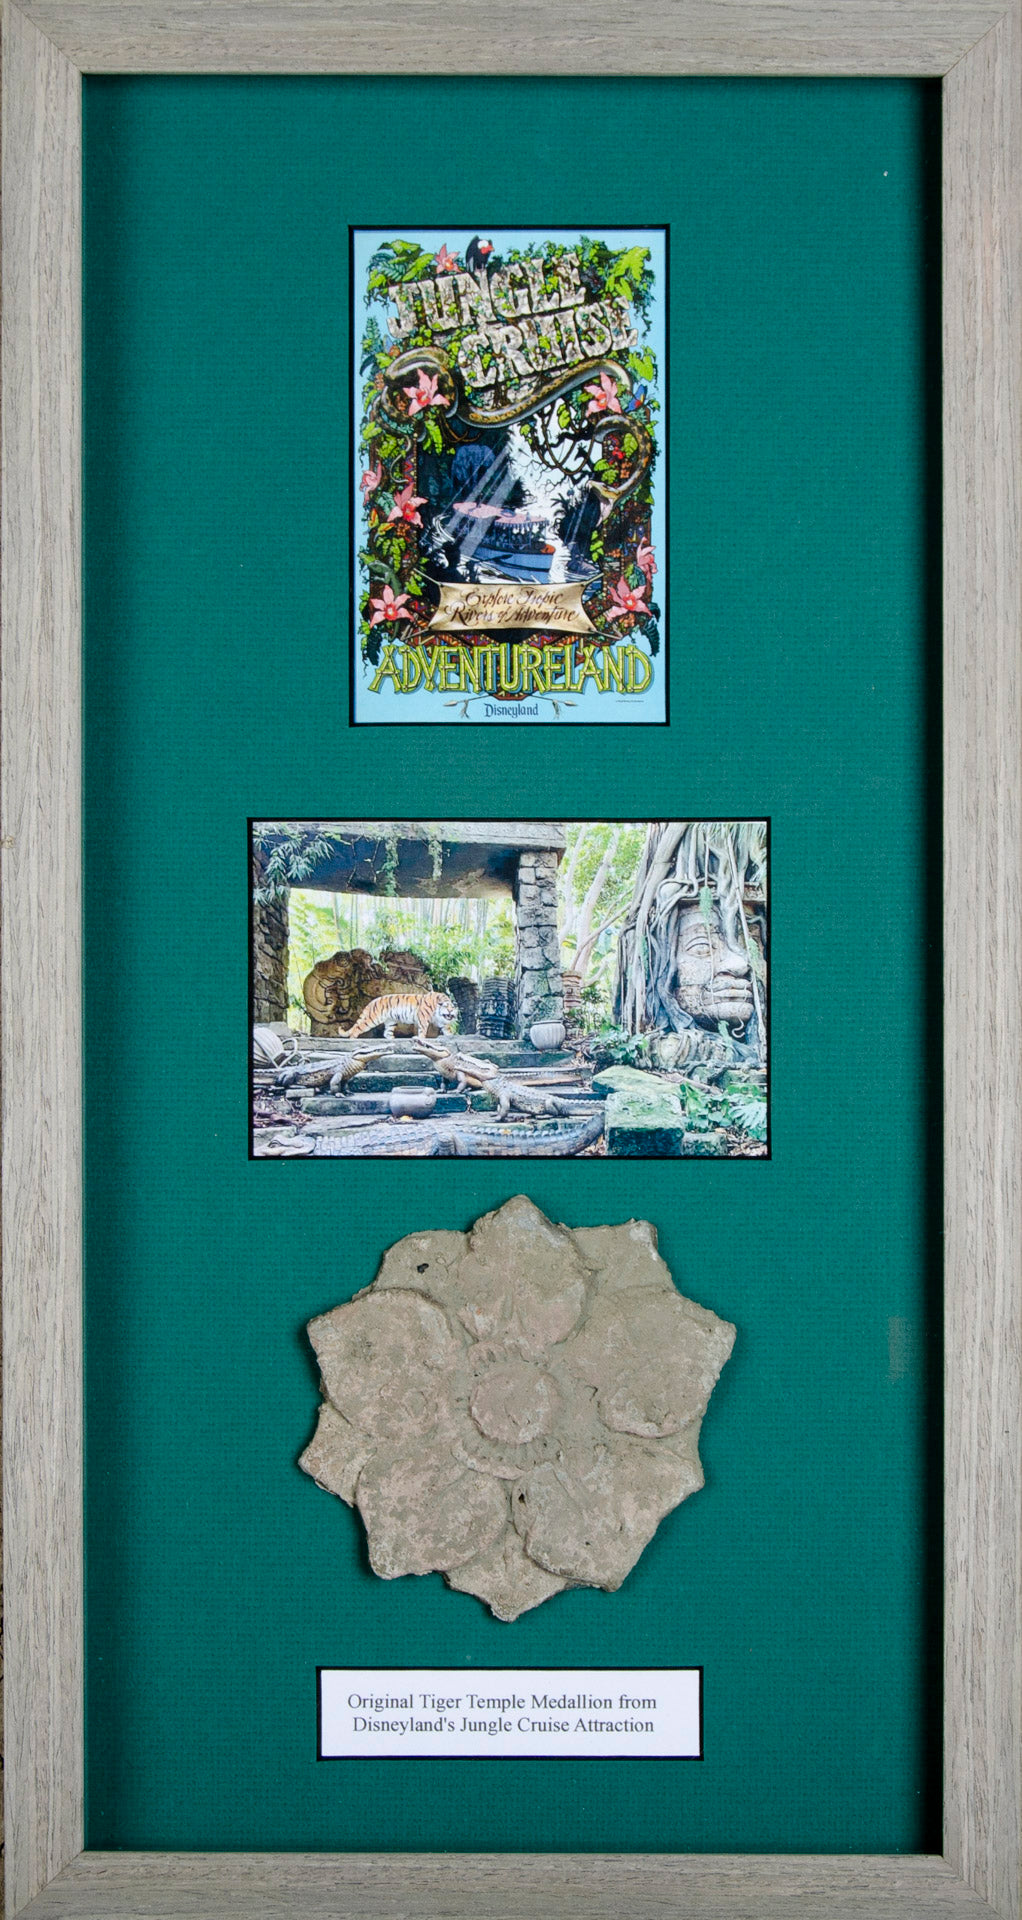 Original Tiger Temple Medallion from Disneyland's Jungle Cruise Attraction